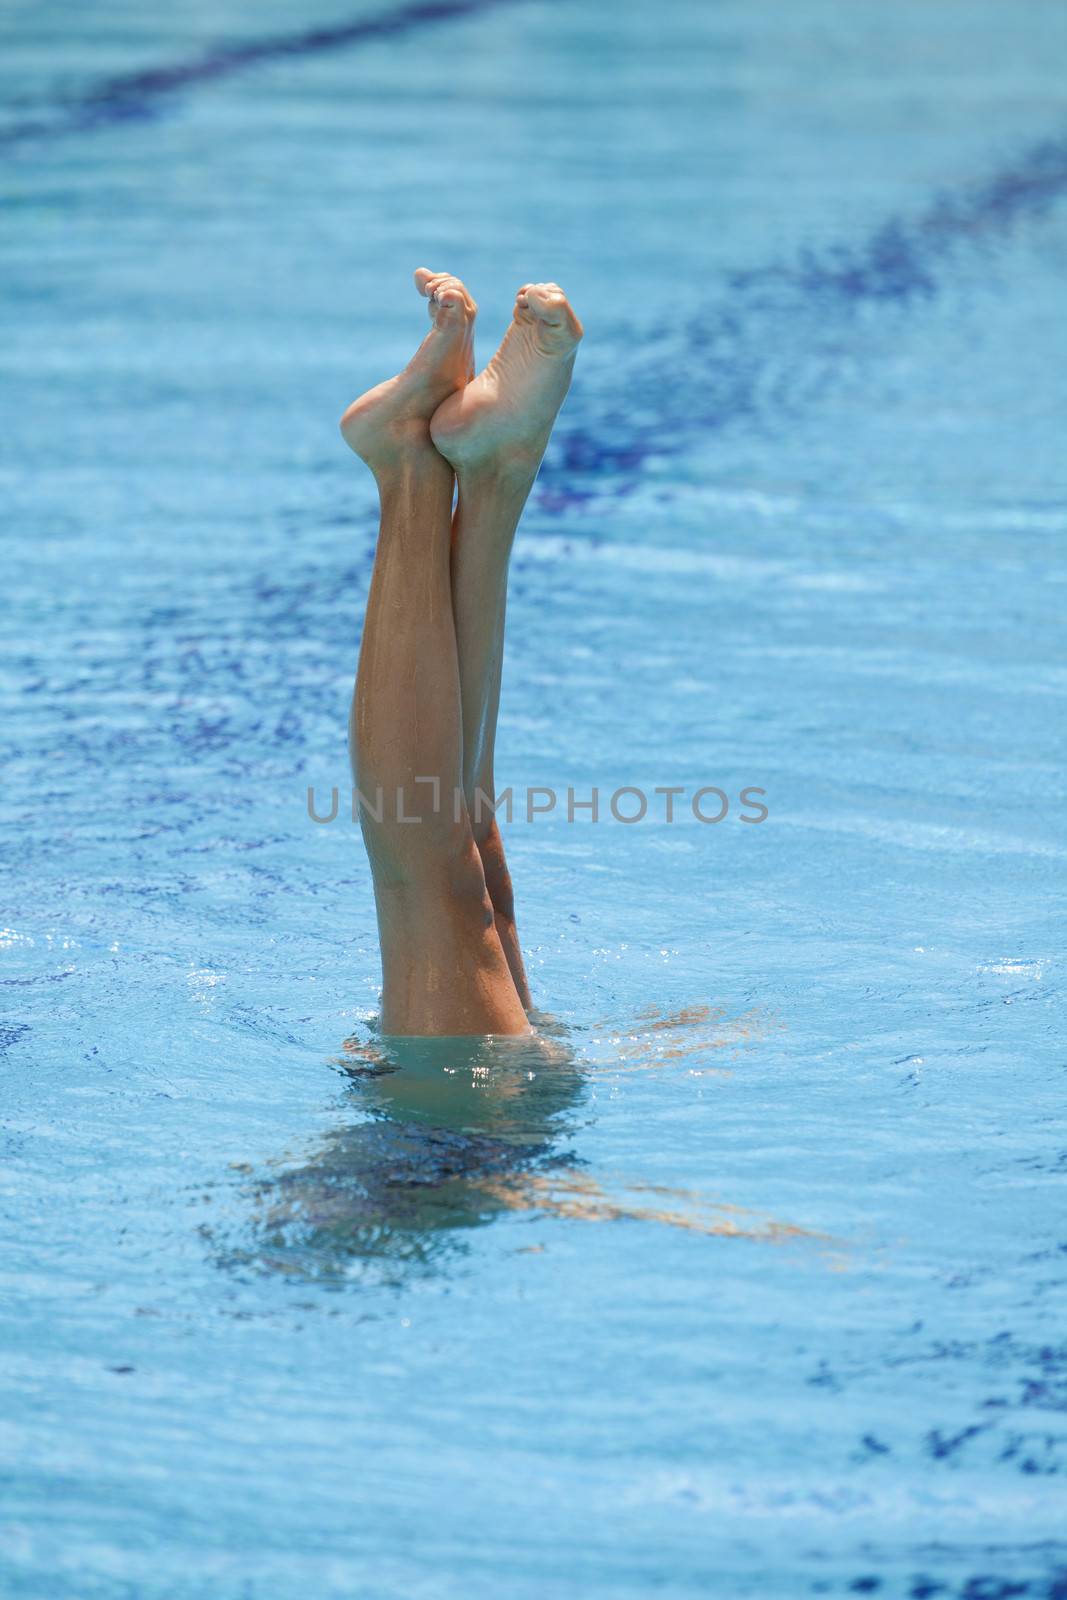 Synchronized swimmers legs point up out of the water in action